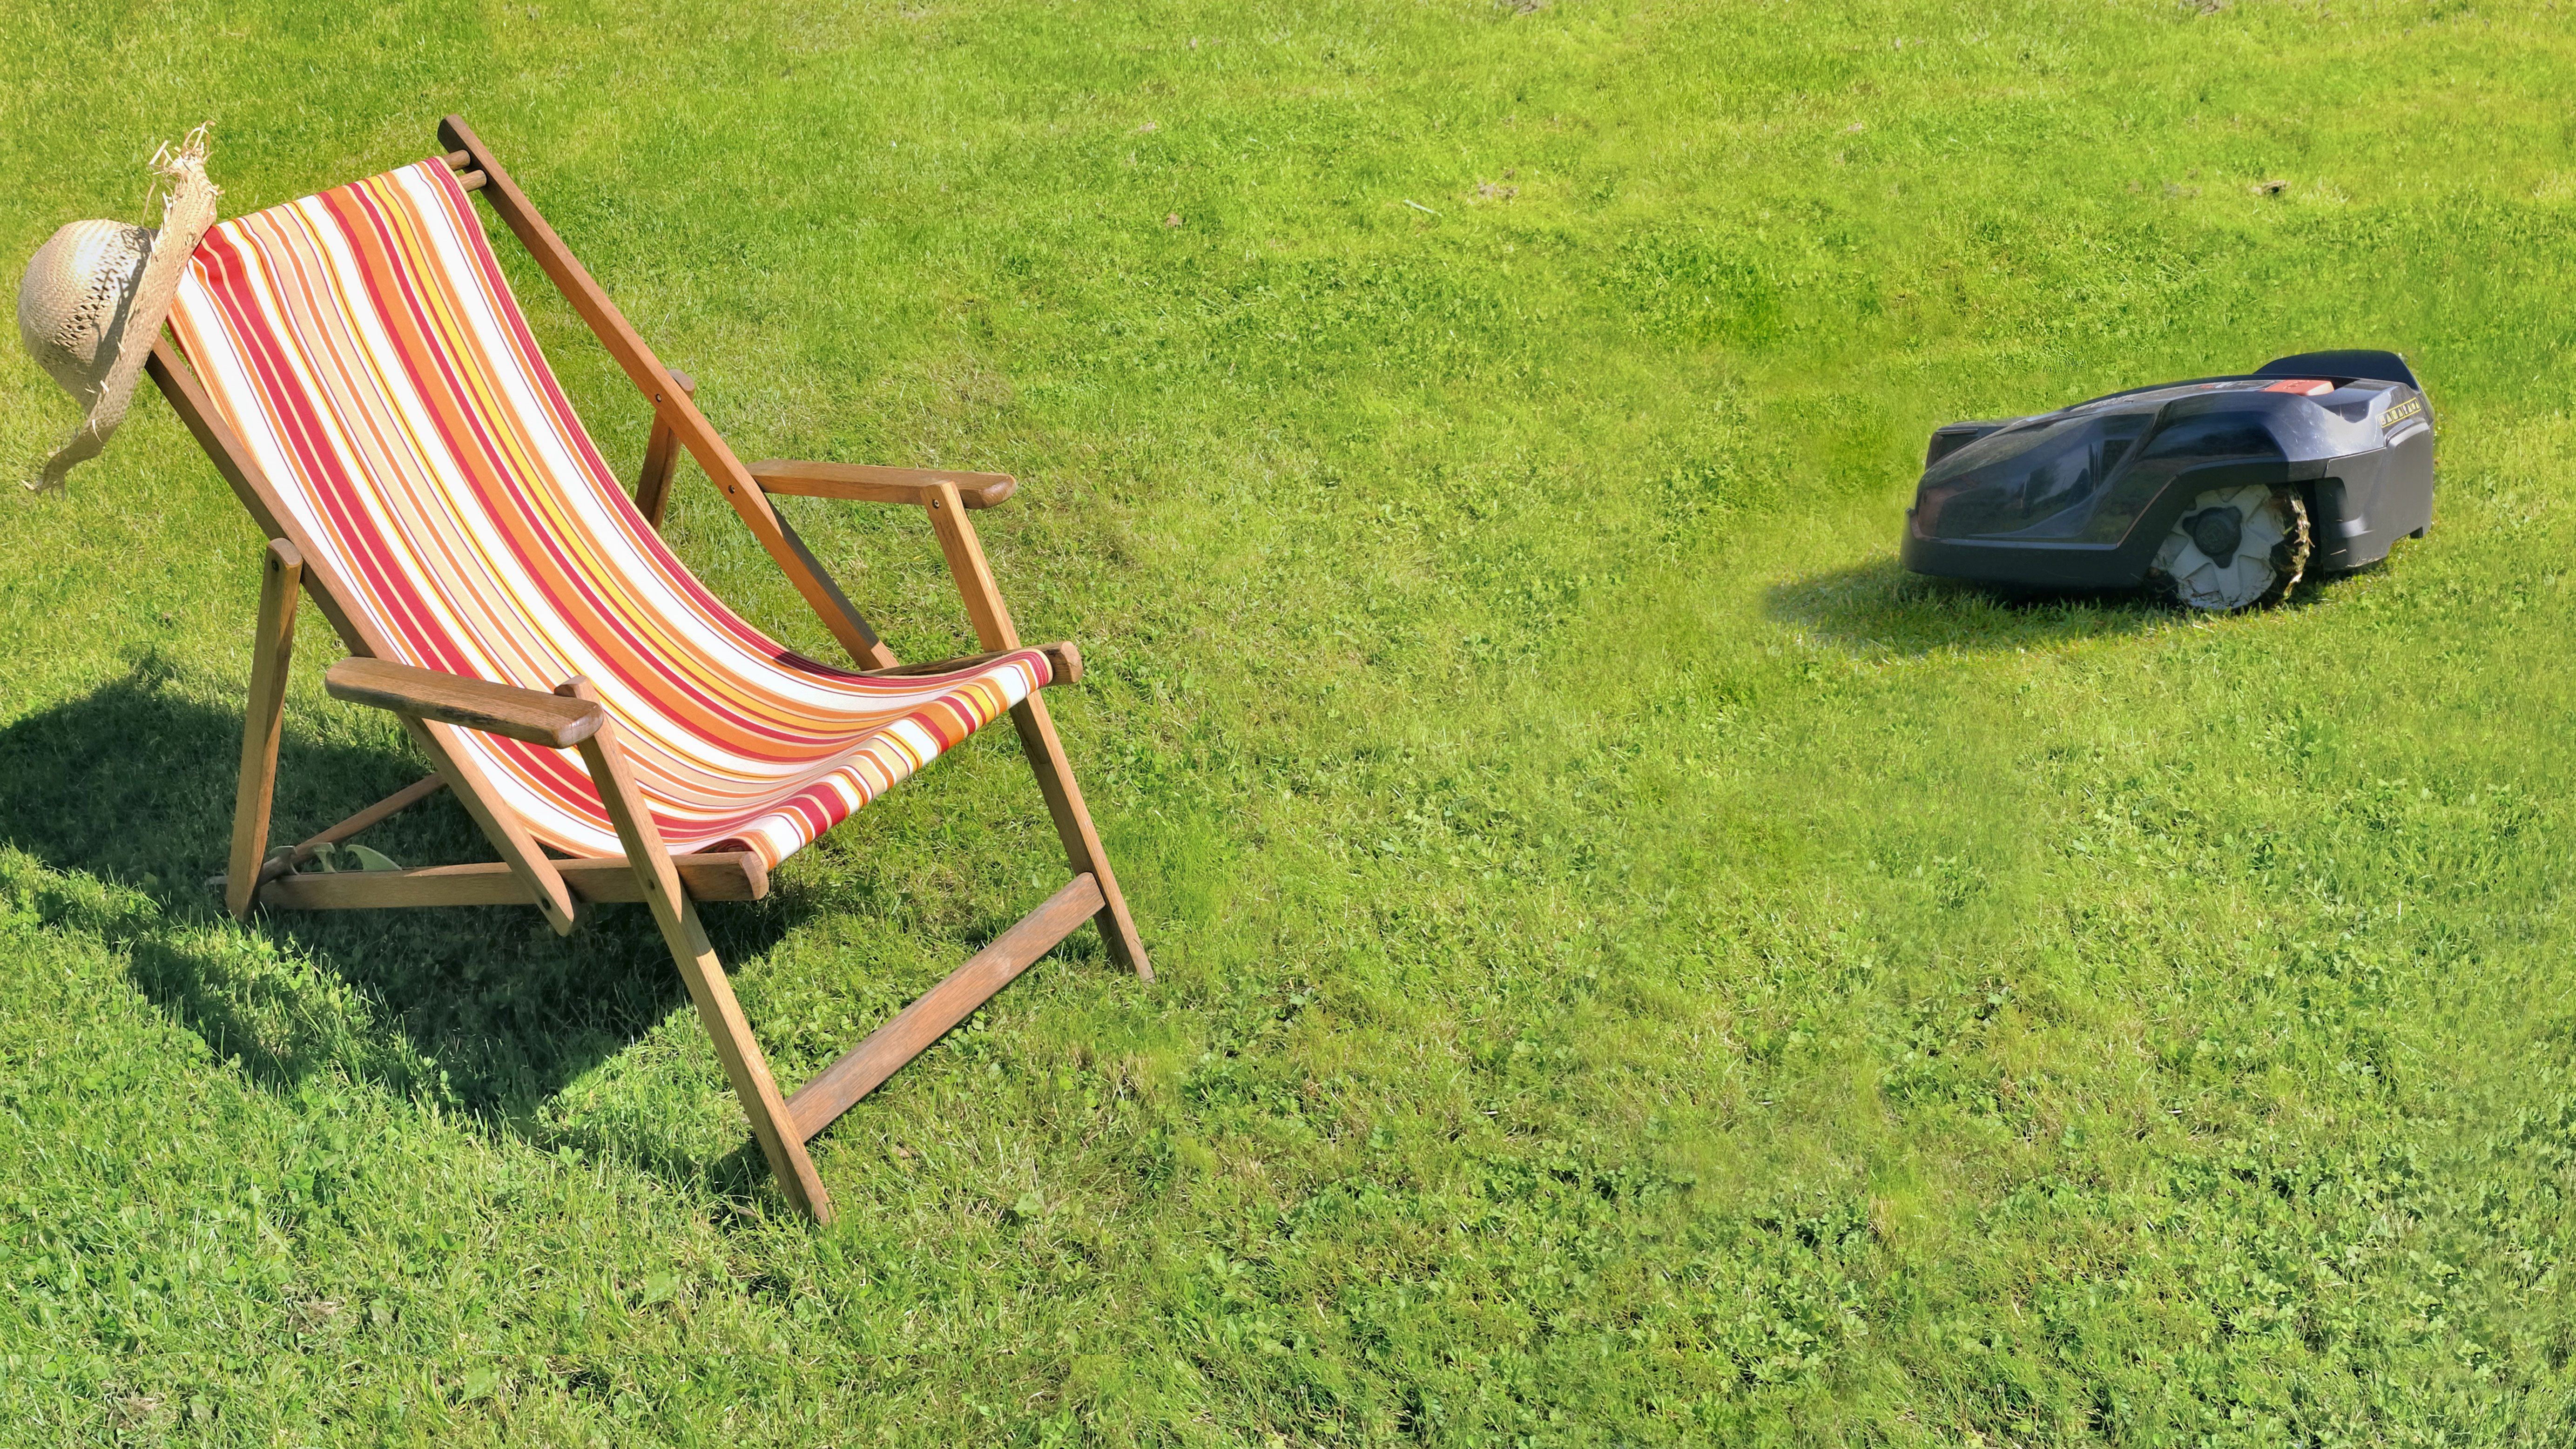 Top Robotic Lawnmowers: Comparing the Best in the Market